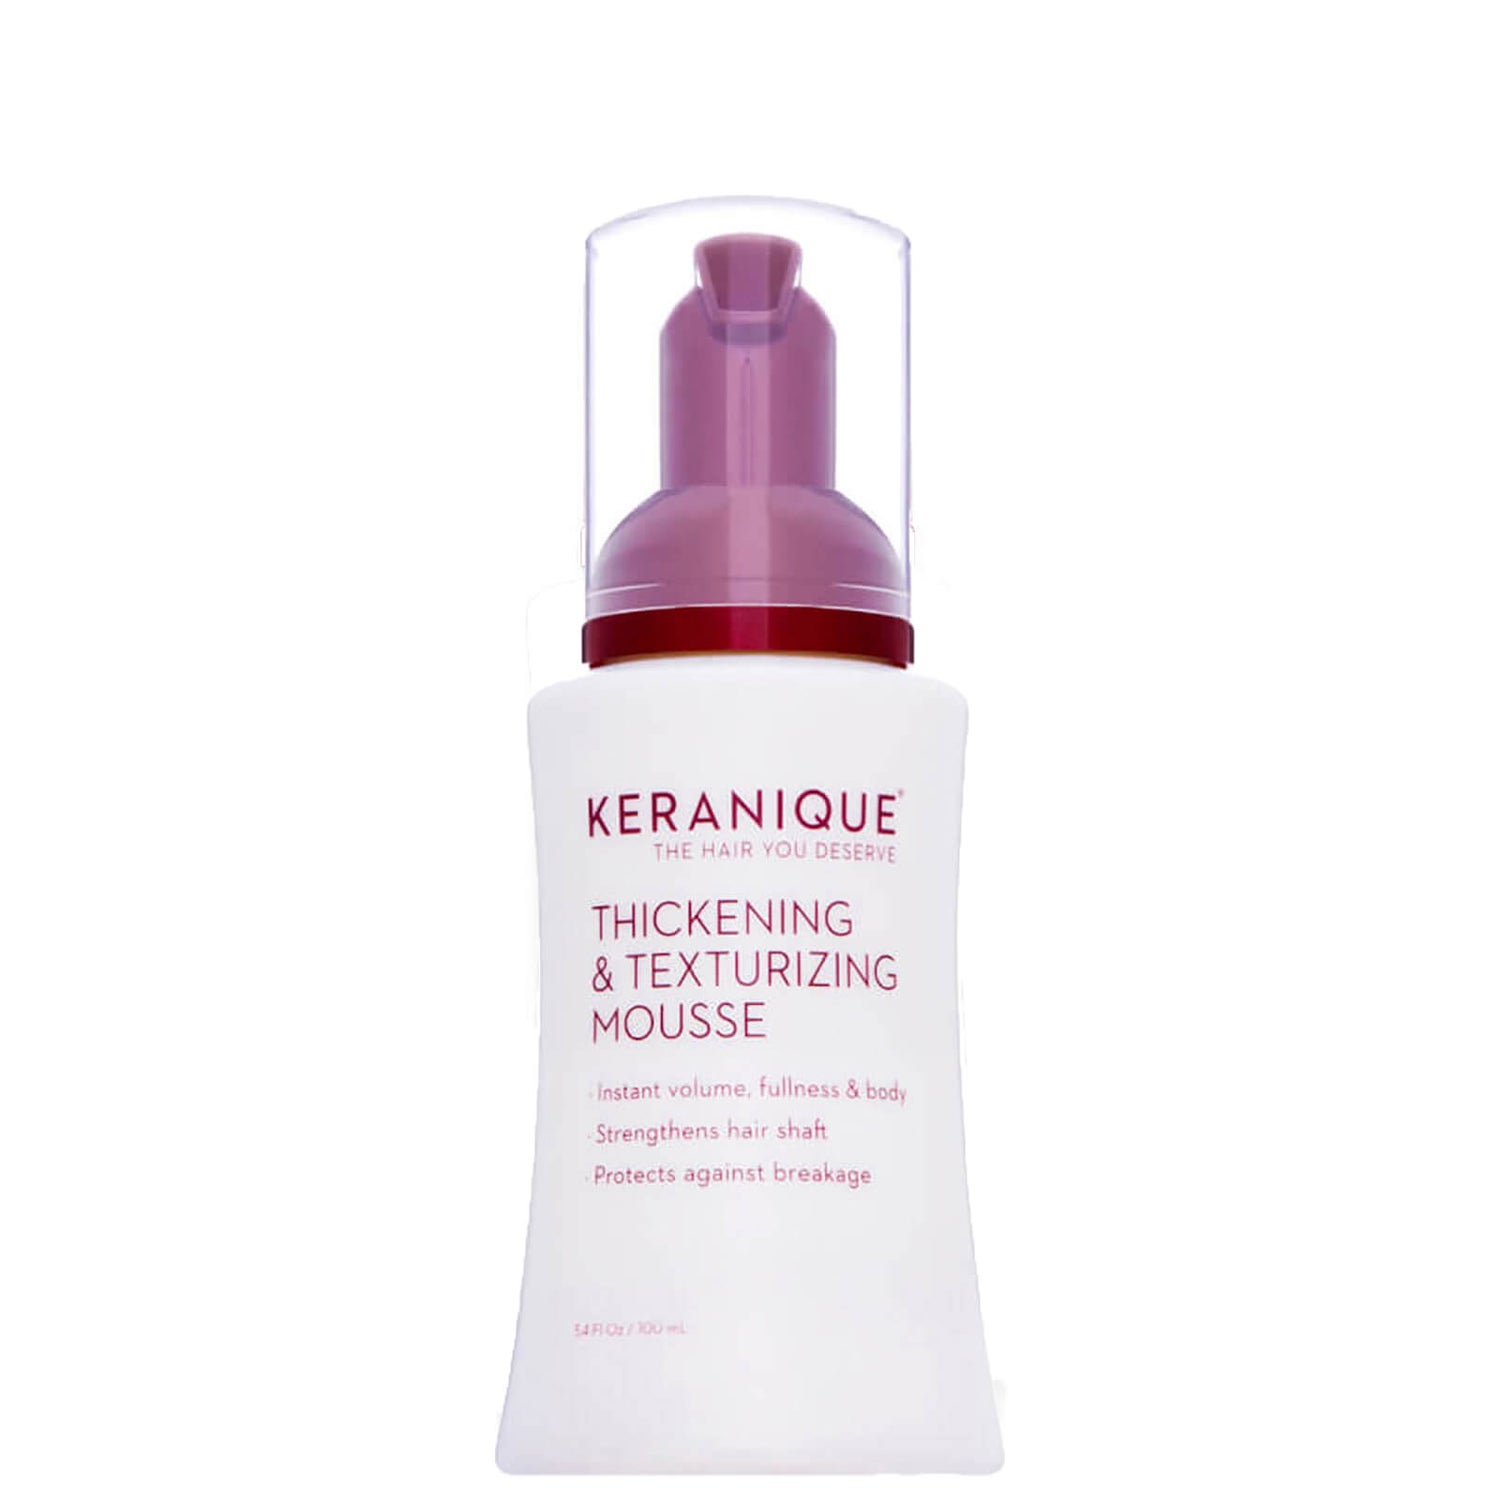 Keranique Thickening and Texturizing Mousse (3.4 oz.)